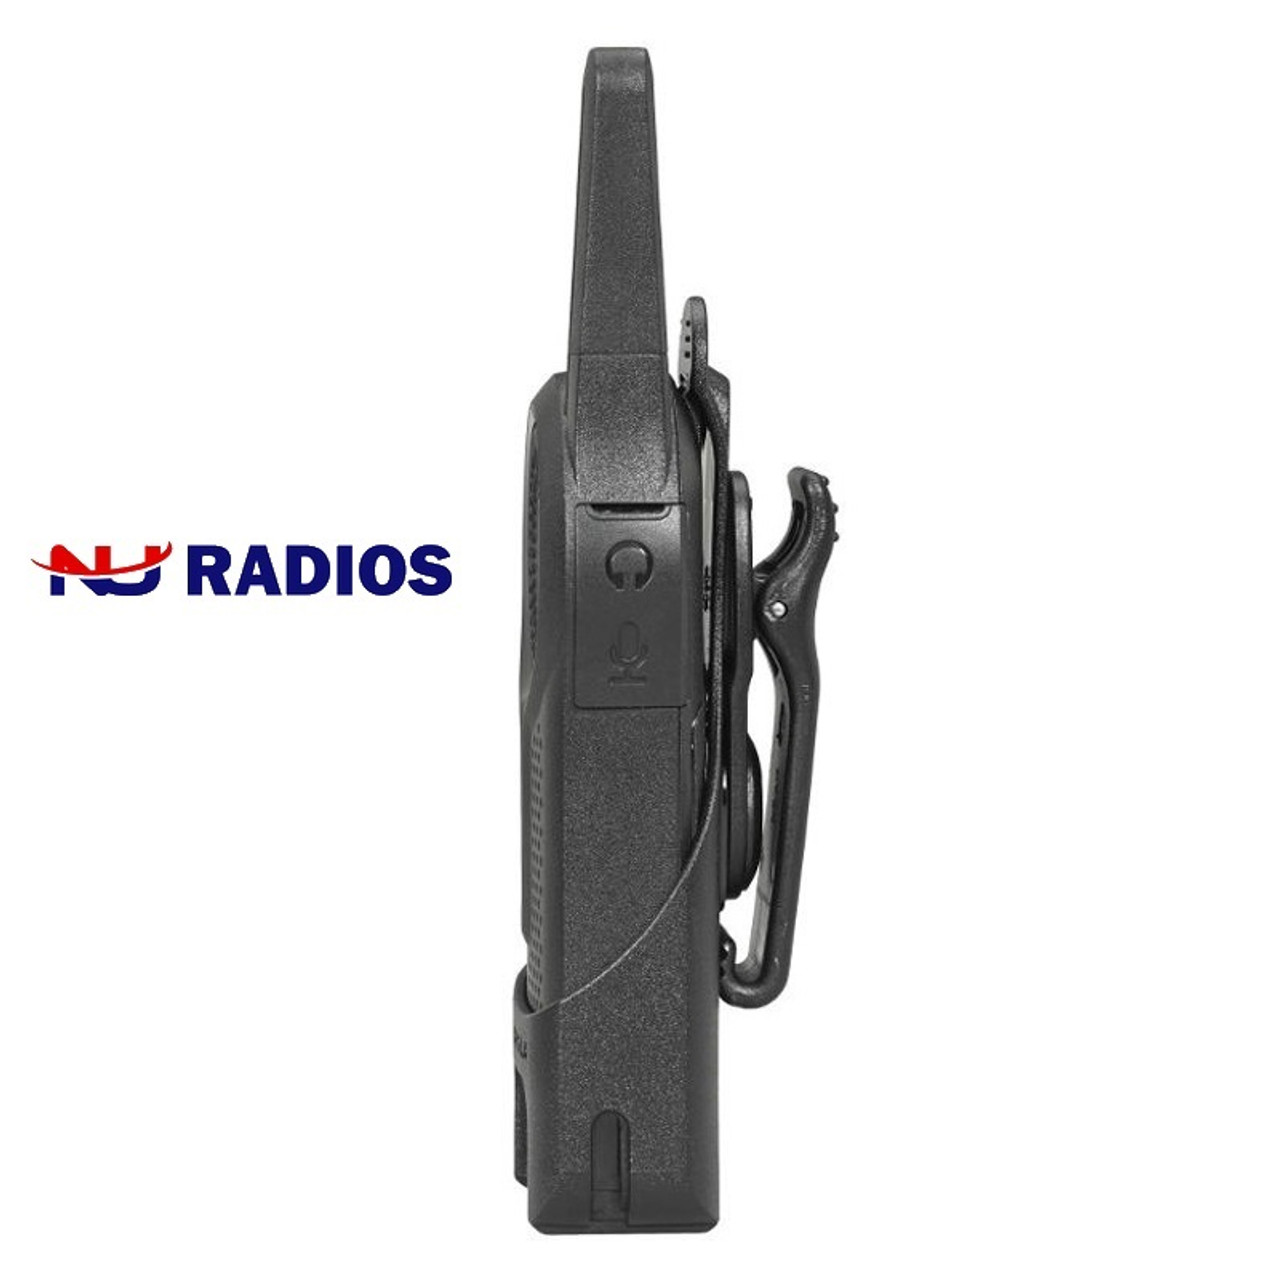 Motorola Six Pack of DLR1060 6CH Digital 2-Way Radios for business is a  LICENSE FREE walkie talkie that includes a holster, battery and AC charger.